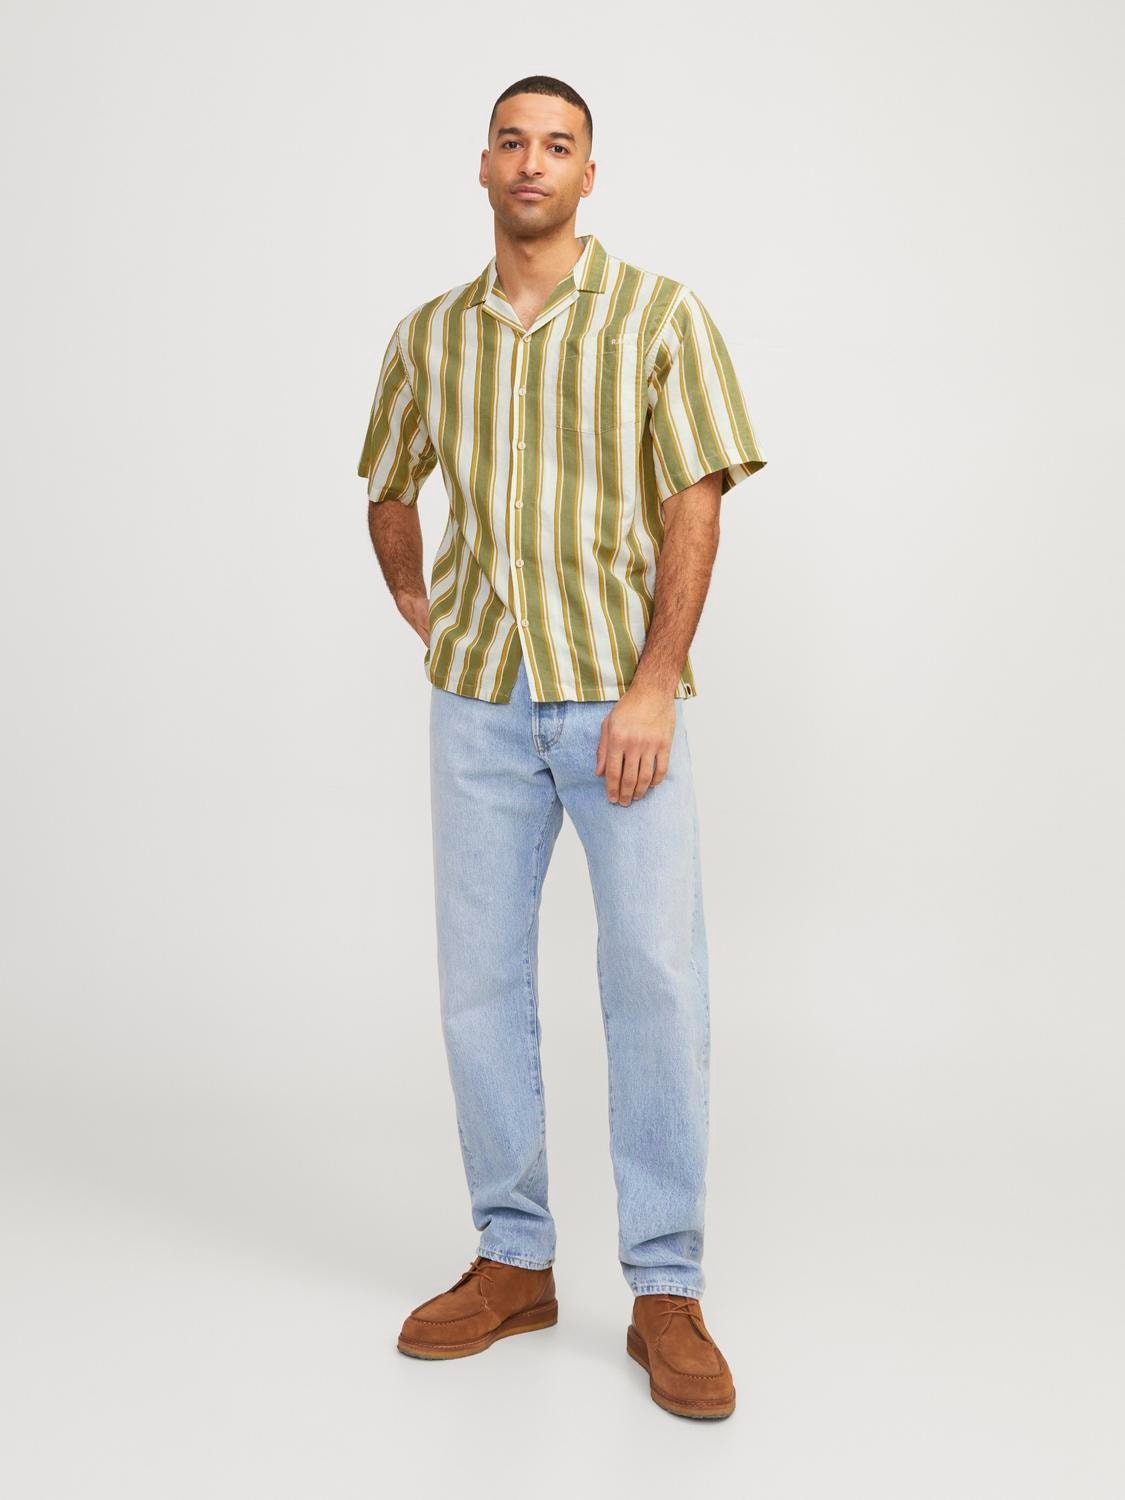 Jack & Jones RDD Stile Hawaiano Relaxed Fit -Sage - 12254561